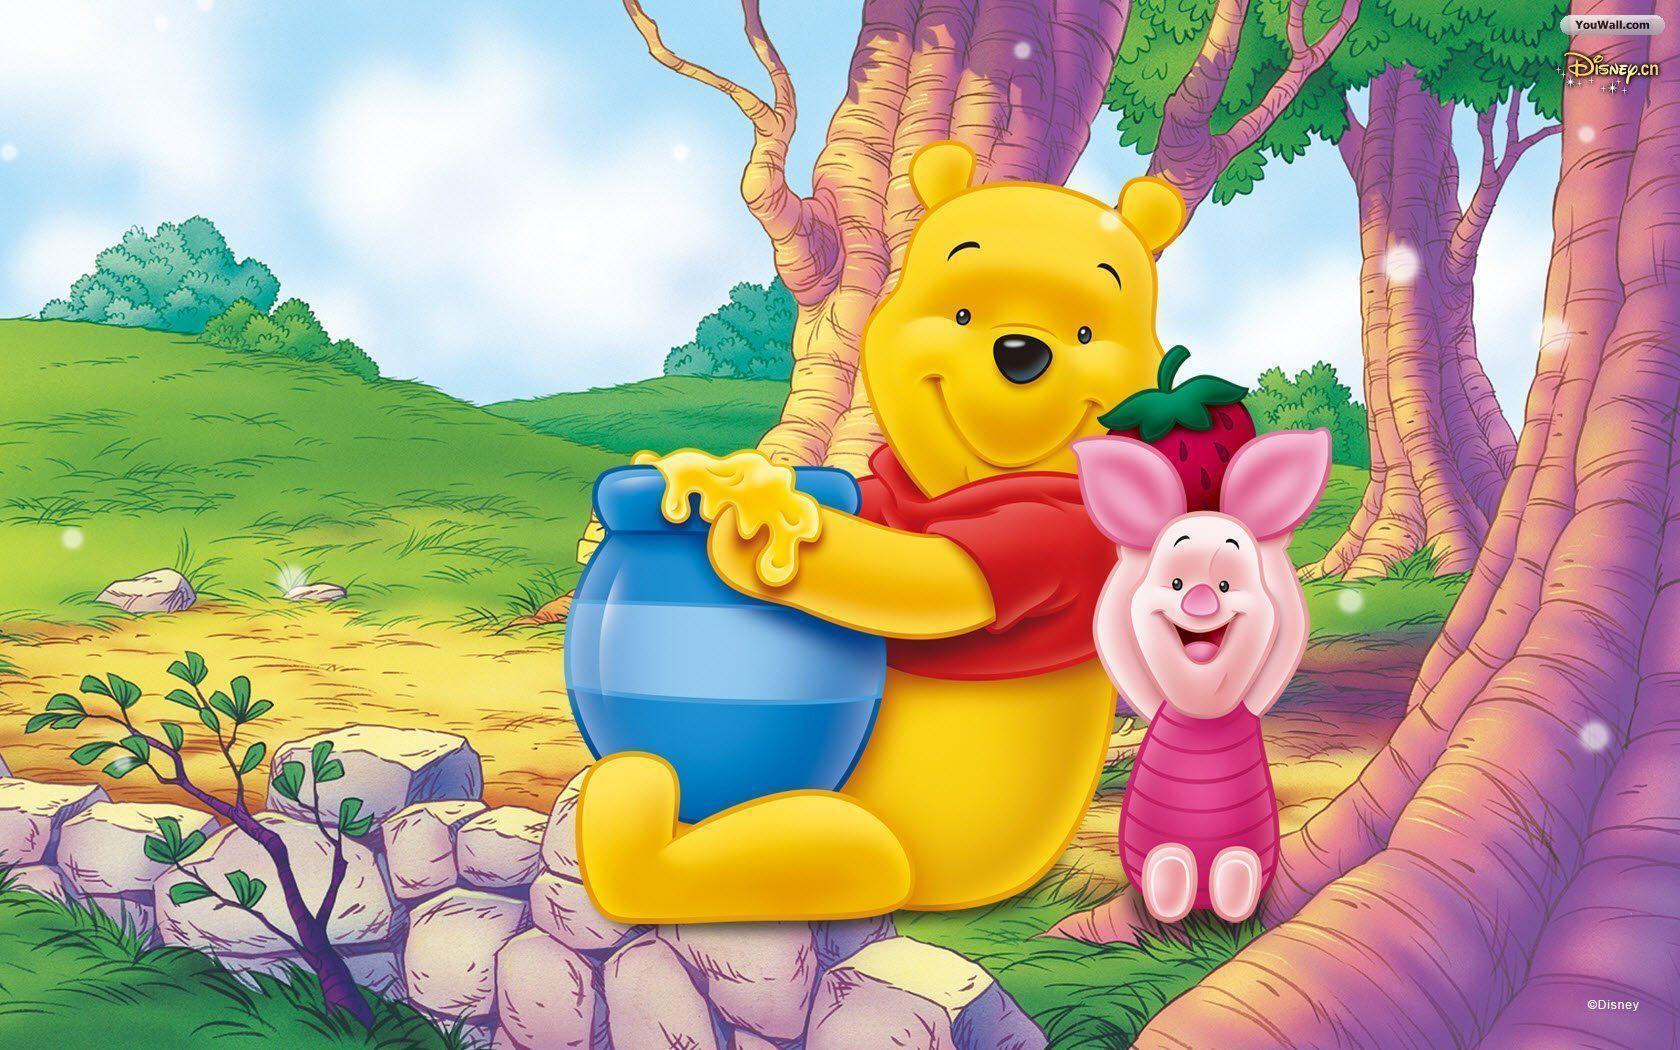 Winnie Pooh Wallpapers Free for Desktop Cartoons Image 1680x1050PX.